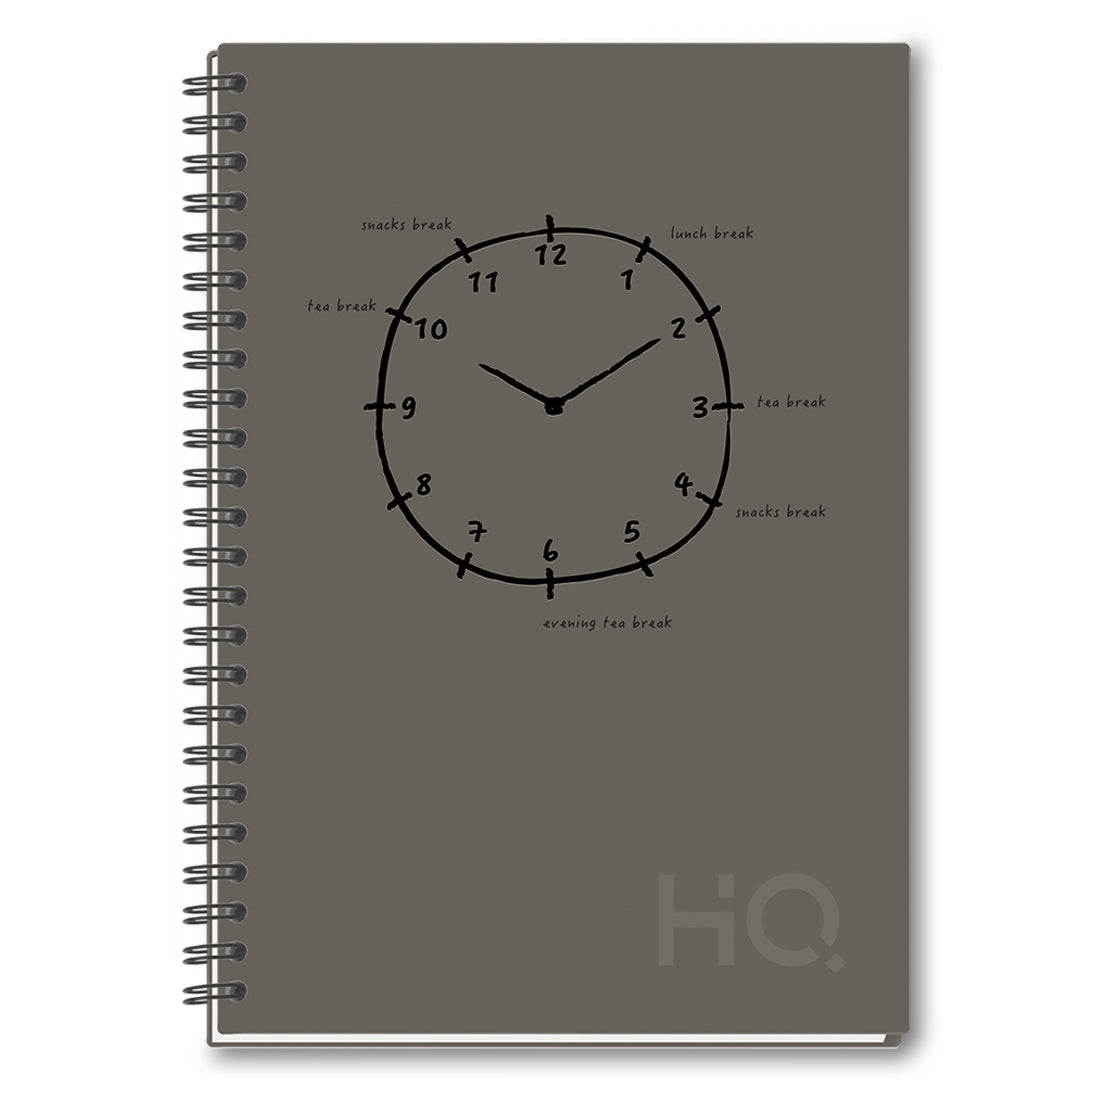 Navneet HQ | Hard Cover Notebook - Corporate Edge (Gray) for Office and Professional Use | Wiro Bound and UV printing | Single Line | A5 Size - 21 cm x 14.8 cm | 192 Pages